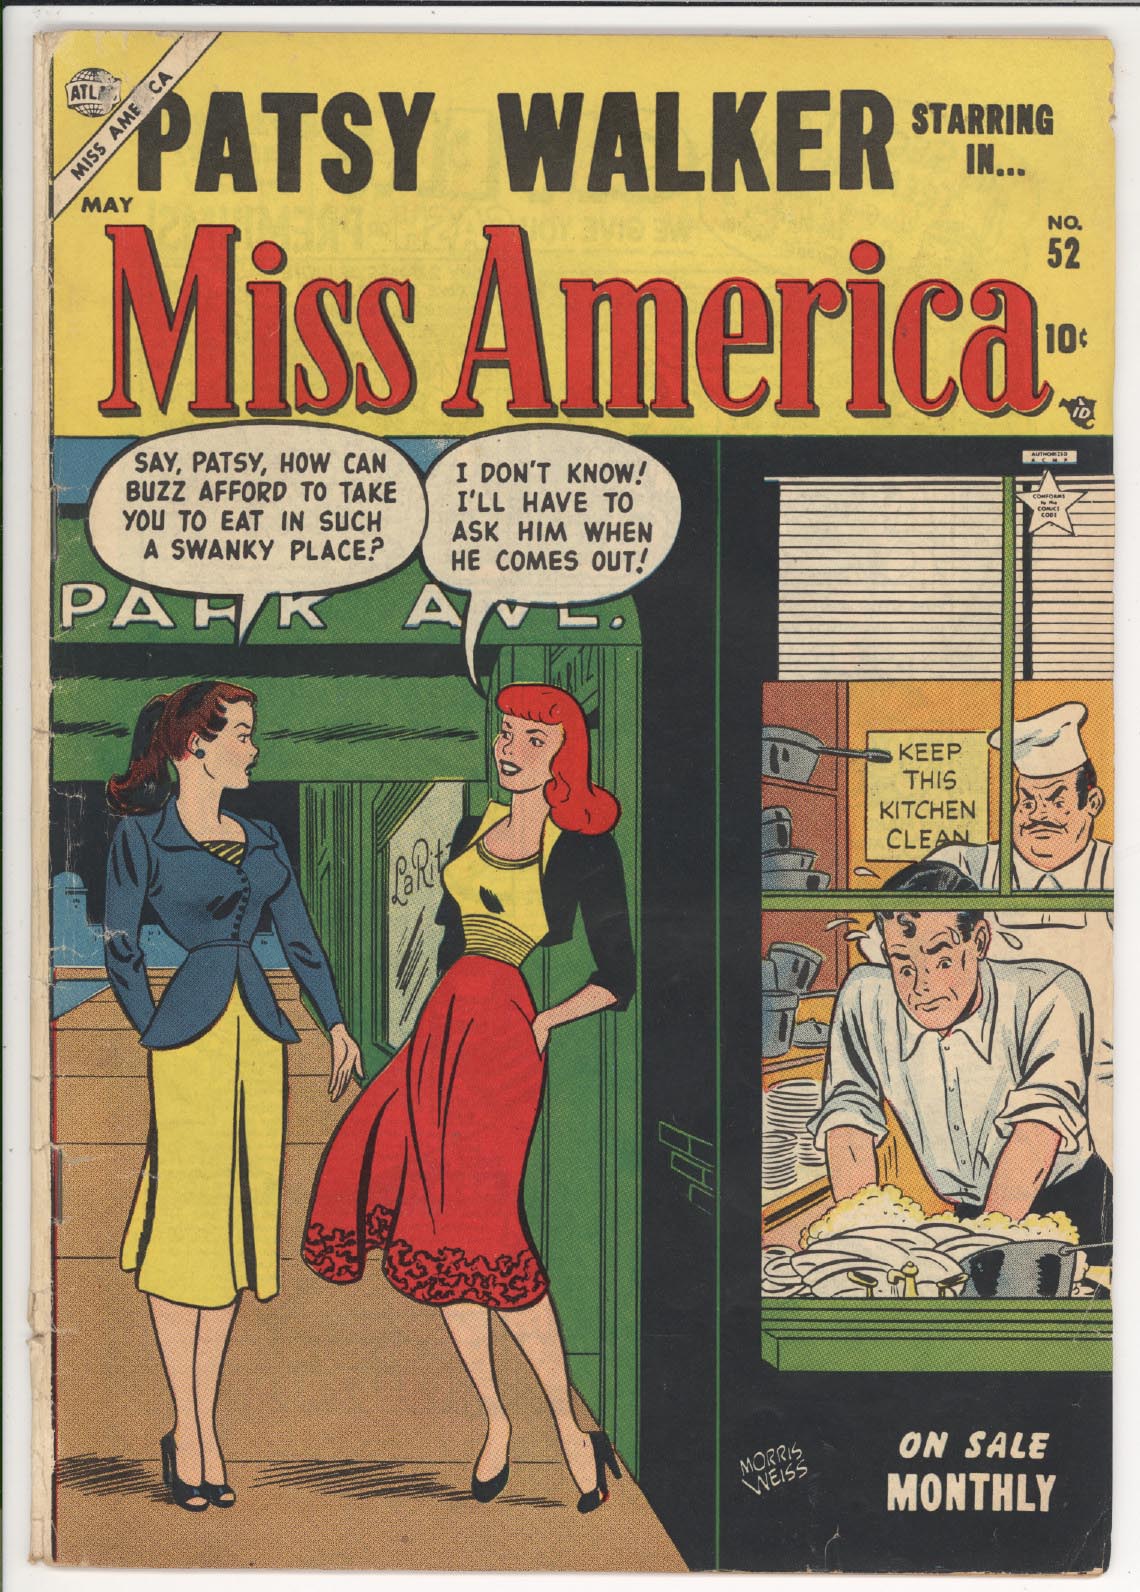 Miss America #52 front